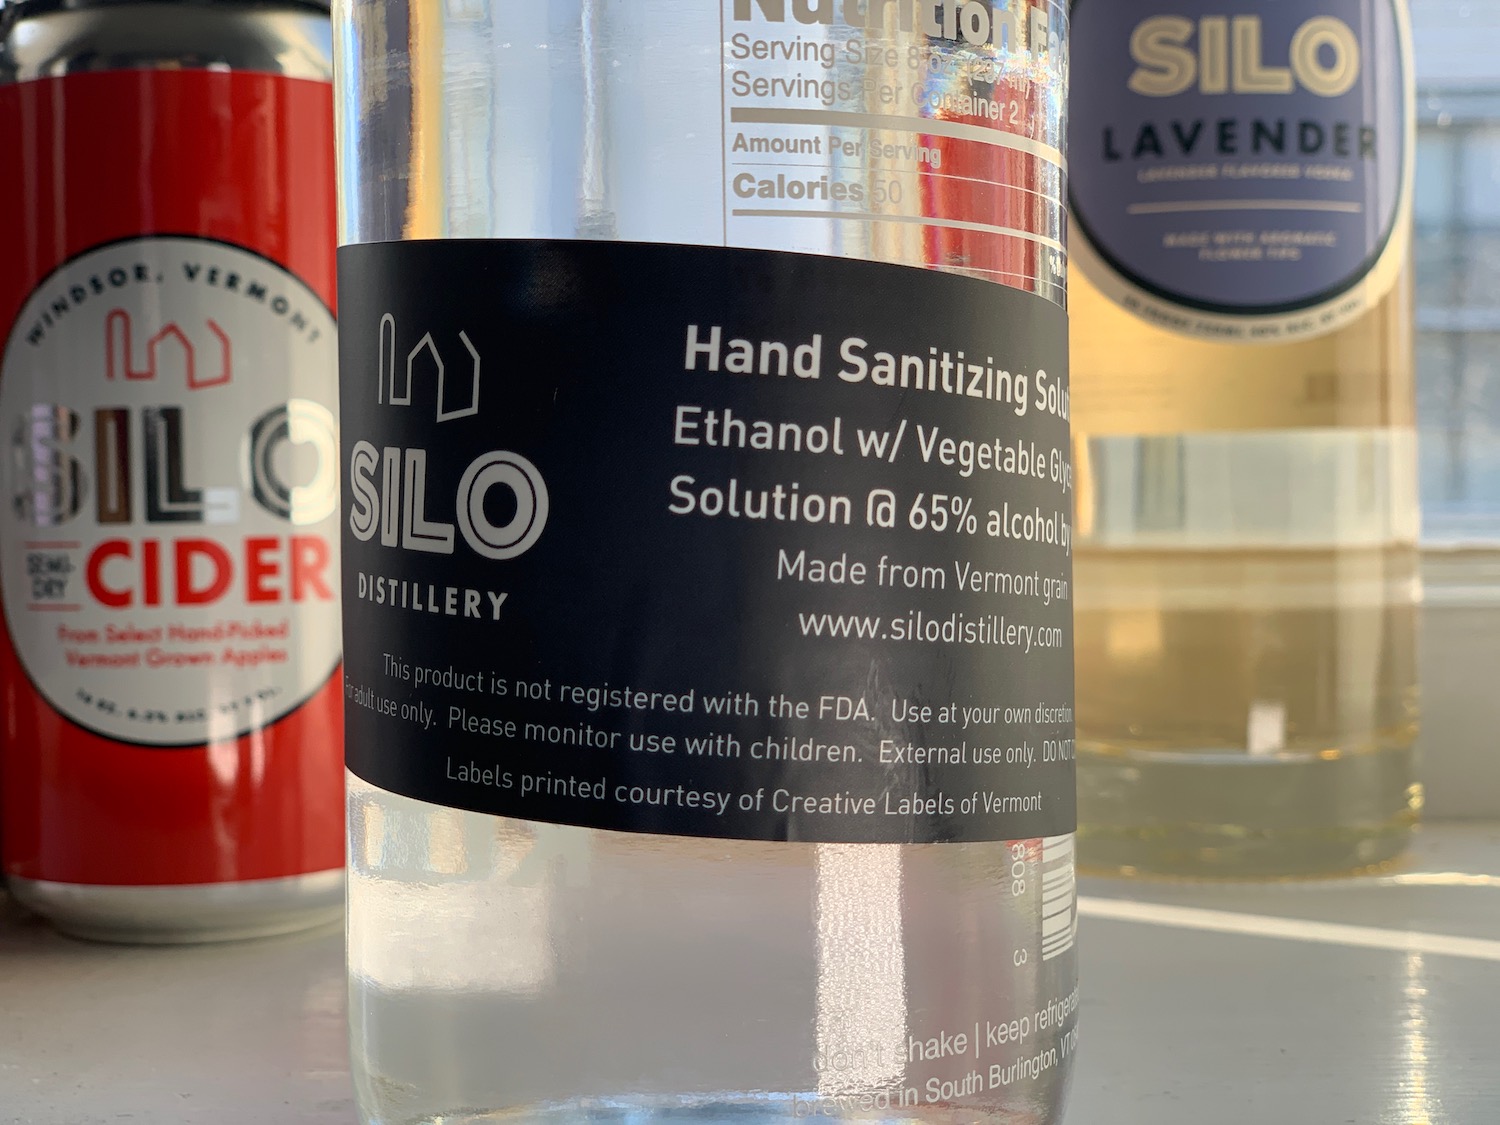 Silo Distillery in Windsor, Vermont is using Vermont-grown corn to create hand sanitizer from their vodka production.